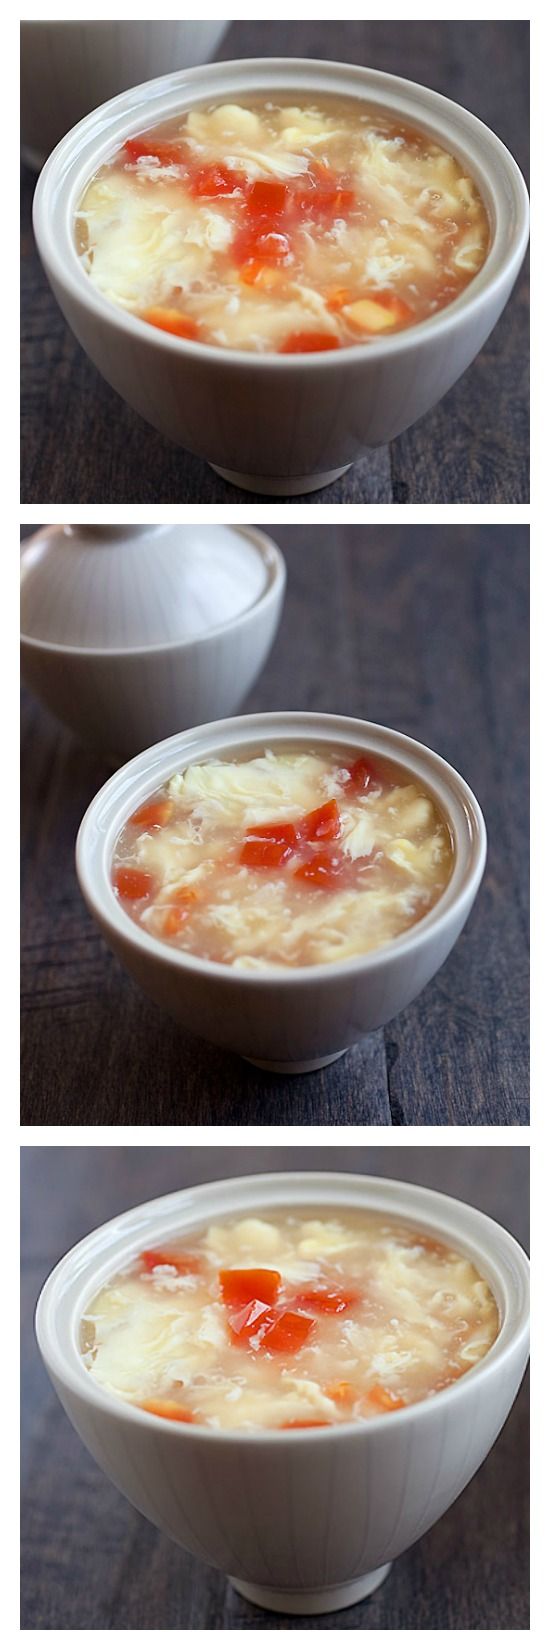 Egg drop soup - easiest and best Chinese egg drop soup recipe you'll find online. Takes 10 minutes, delicious and much better than takeout | rasamalaysia.com